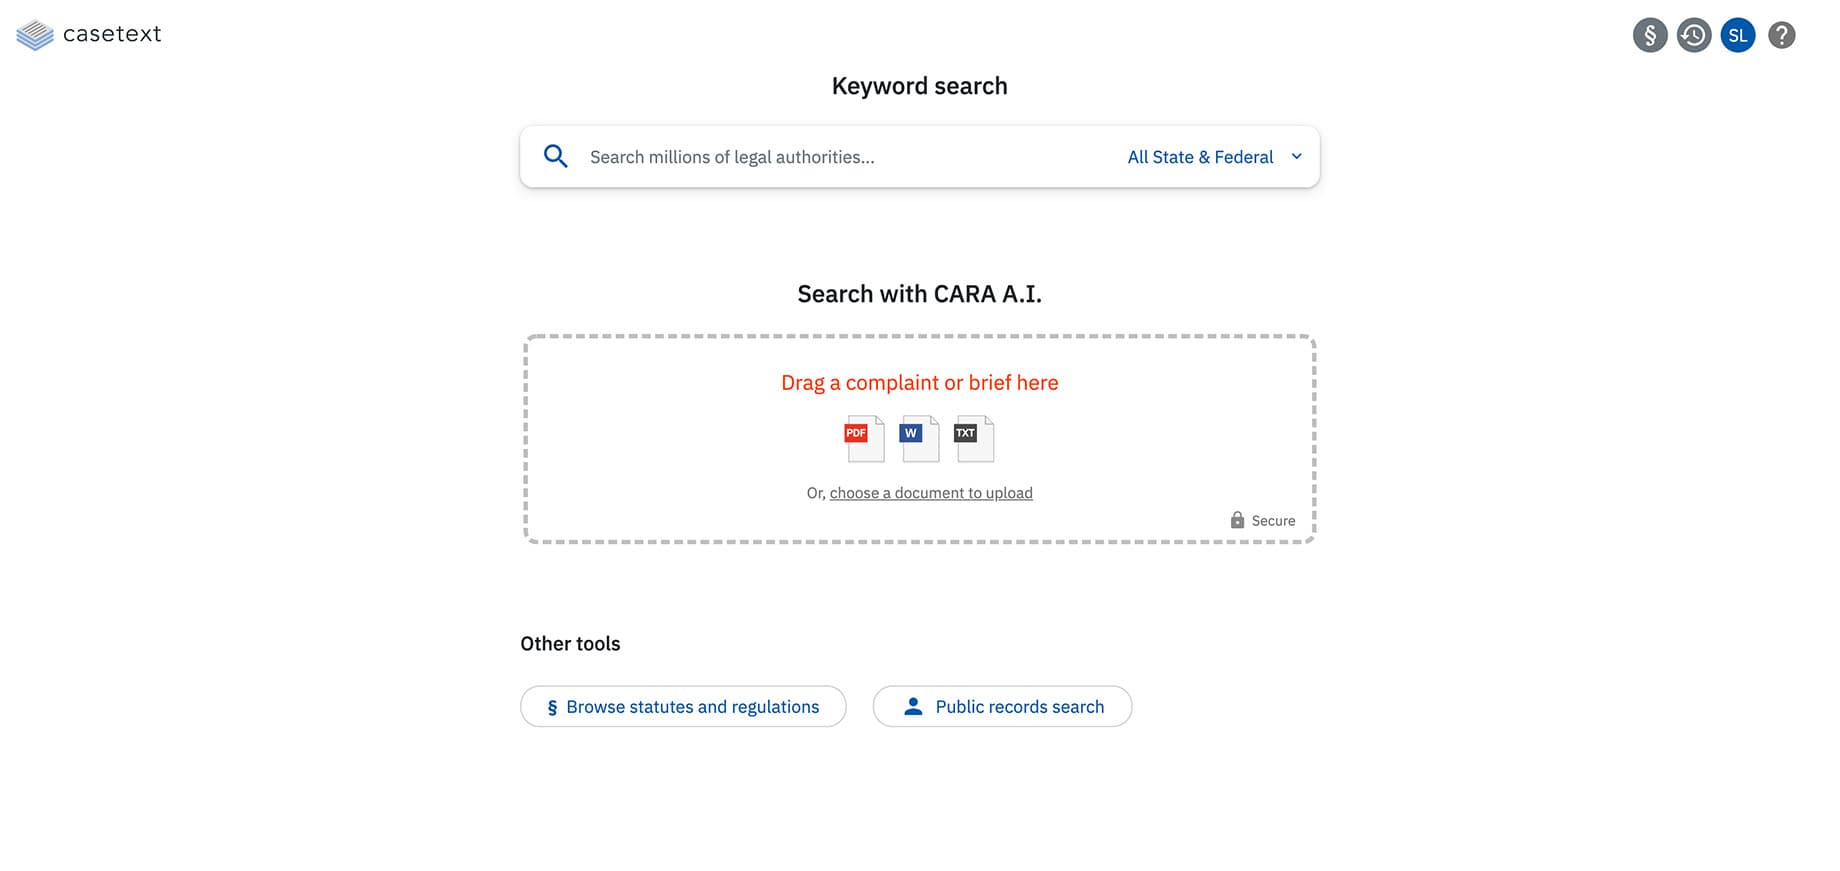 Easy to use legal research interface on Casetext.com